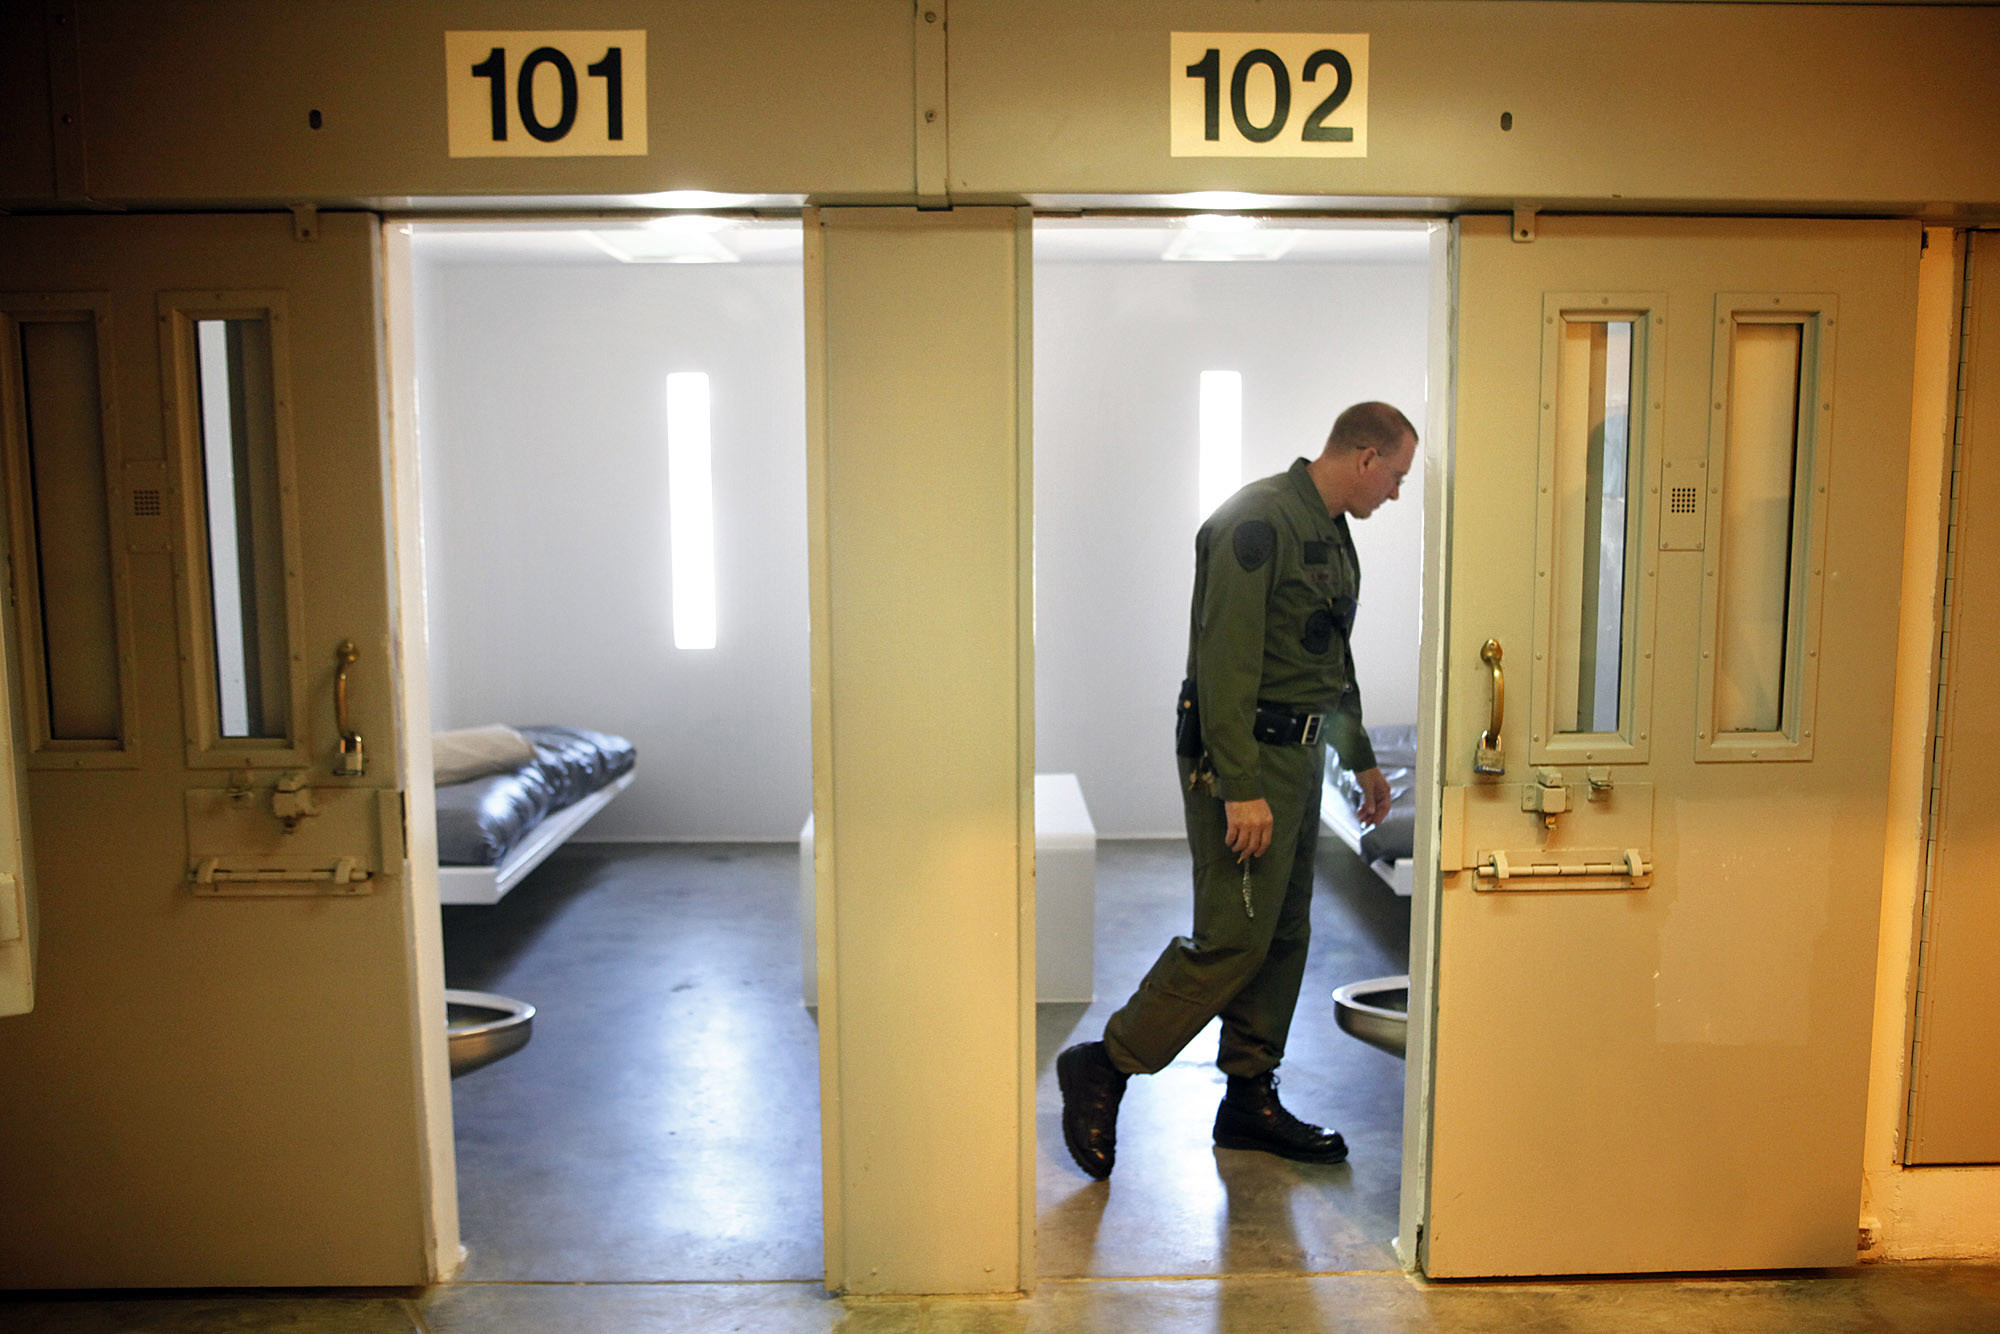 Two inmates found dead in separate cells at Salinas Valley State ... - Los Angeles Times